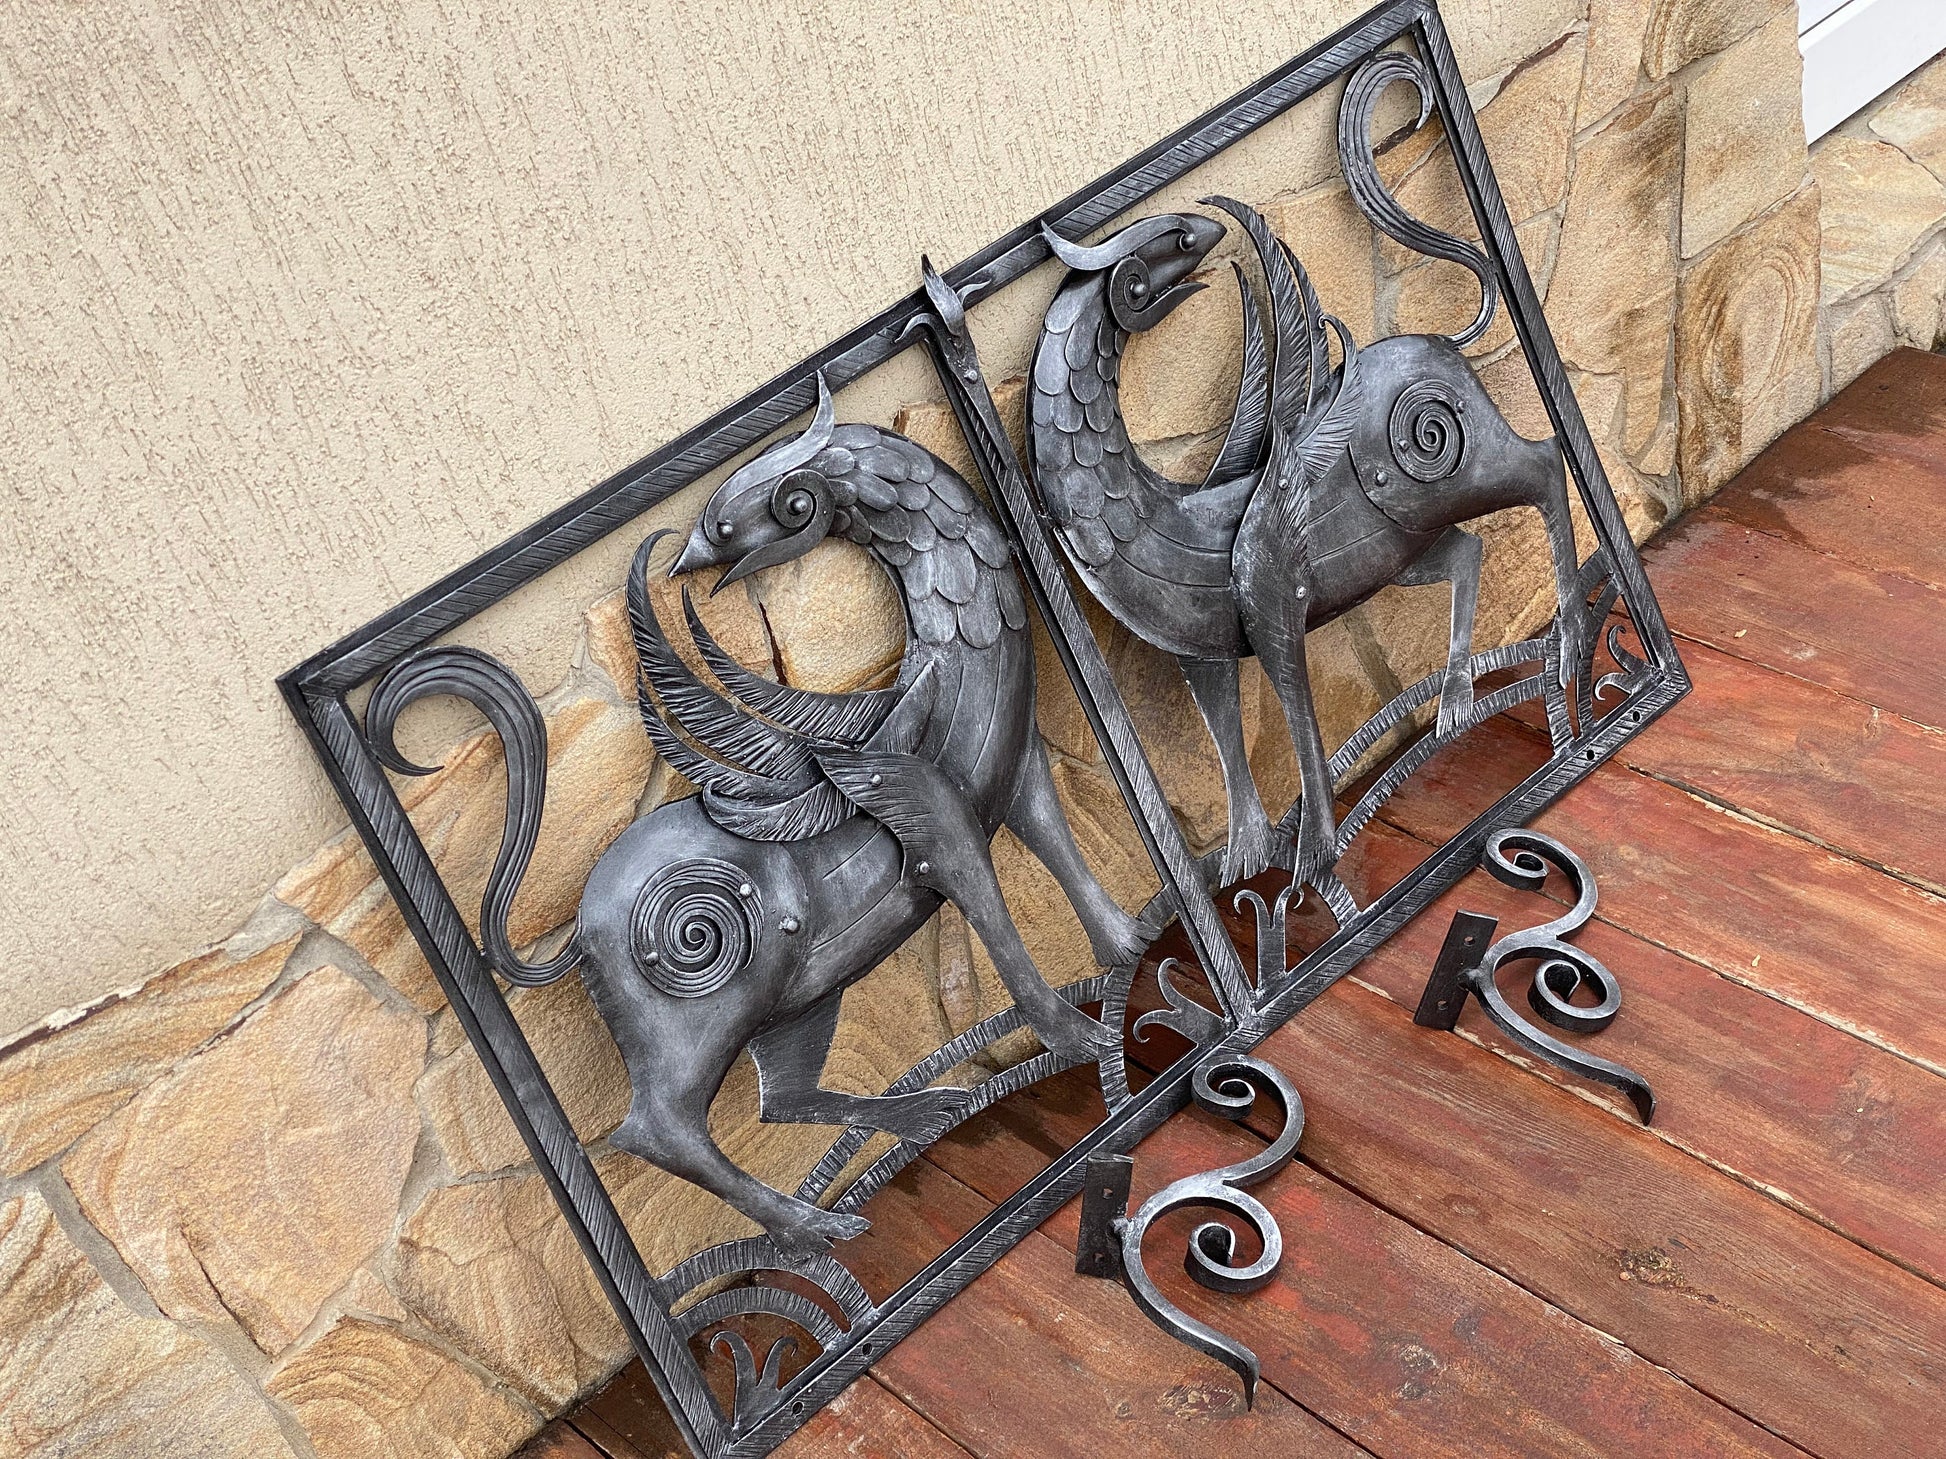 Fireplace screen, mens gift, fireplace, fire poker, anniversary, Celtic, Christmas, birthday, BBQ, grill, medieval, Middle Ages, renovation